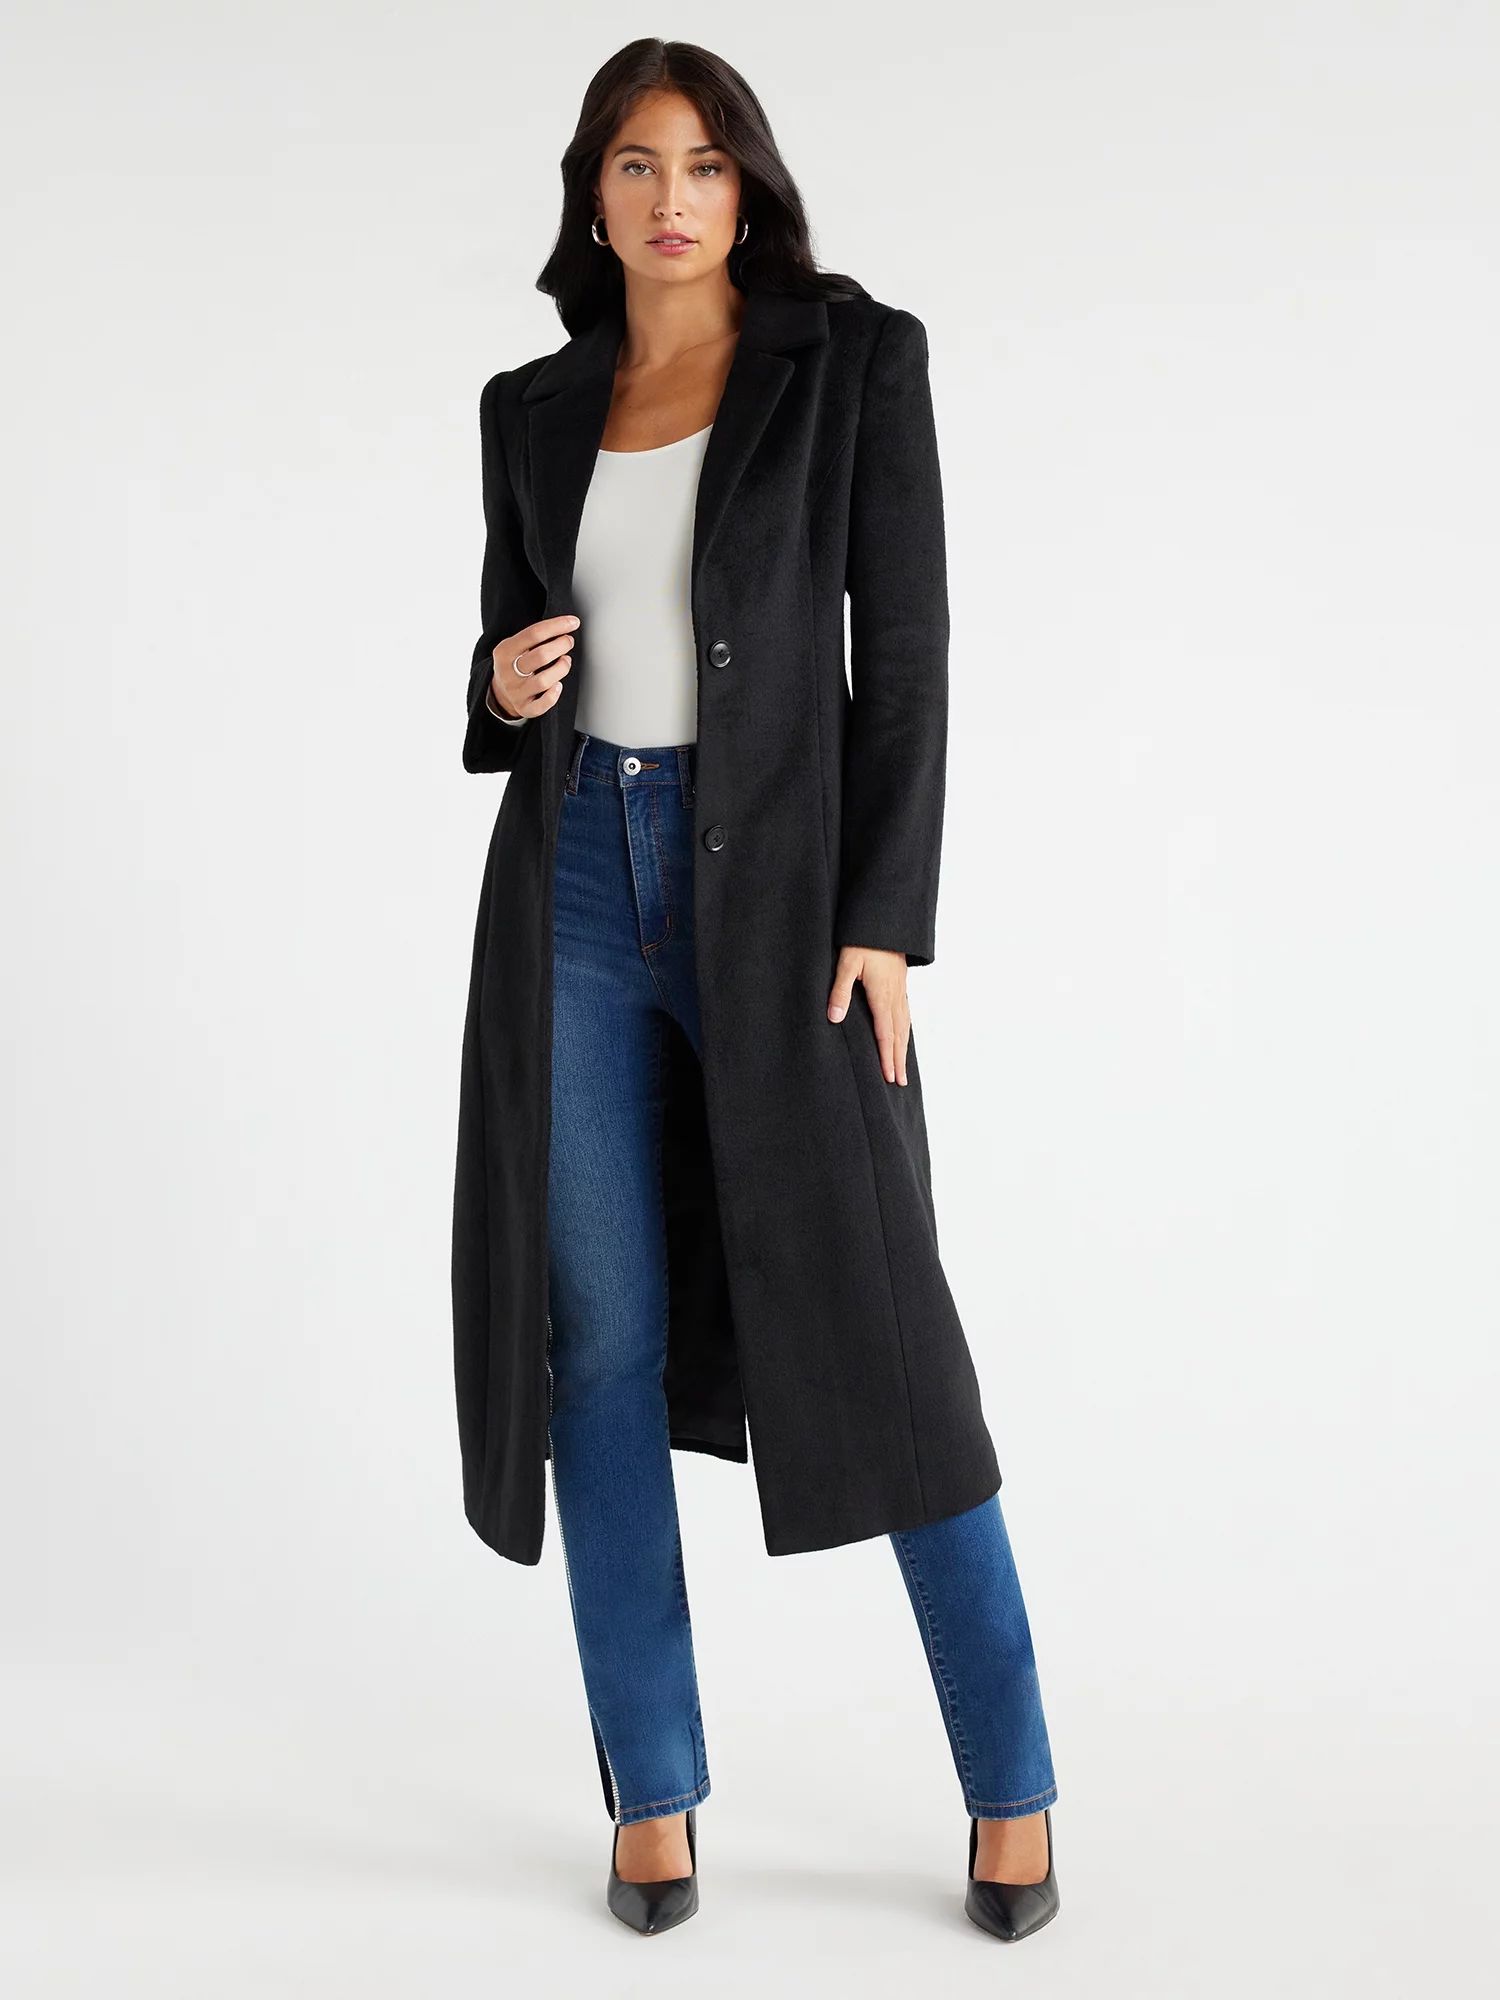 Sofia Jeans Women's Fit and Flare Long Coat, Sizes XS-2XL | Walmart (US)